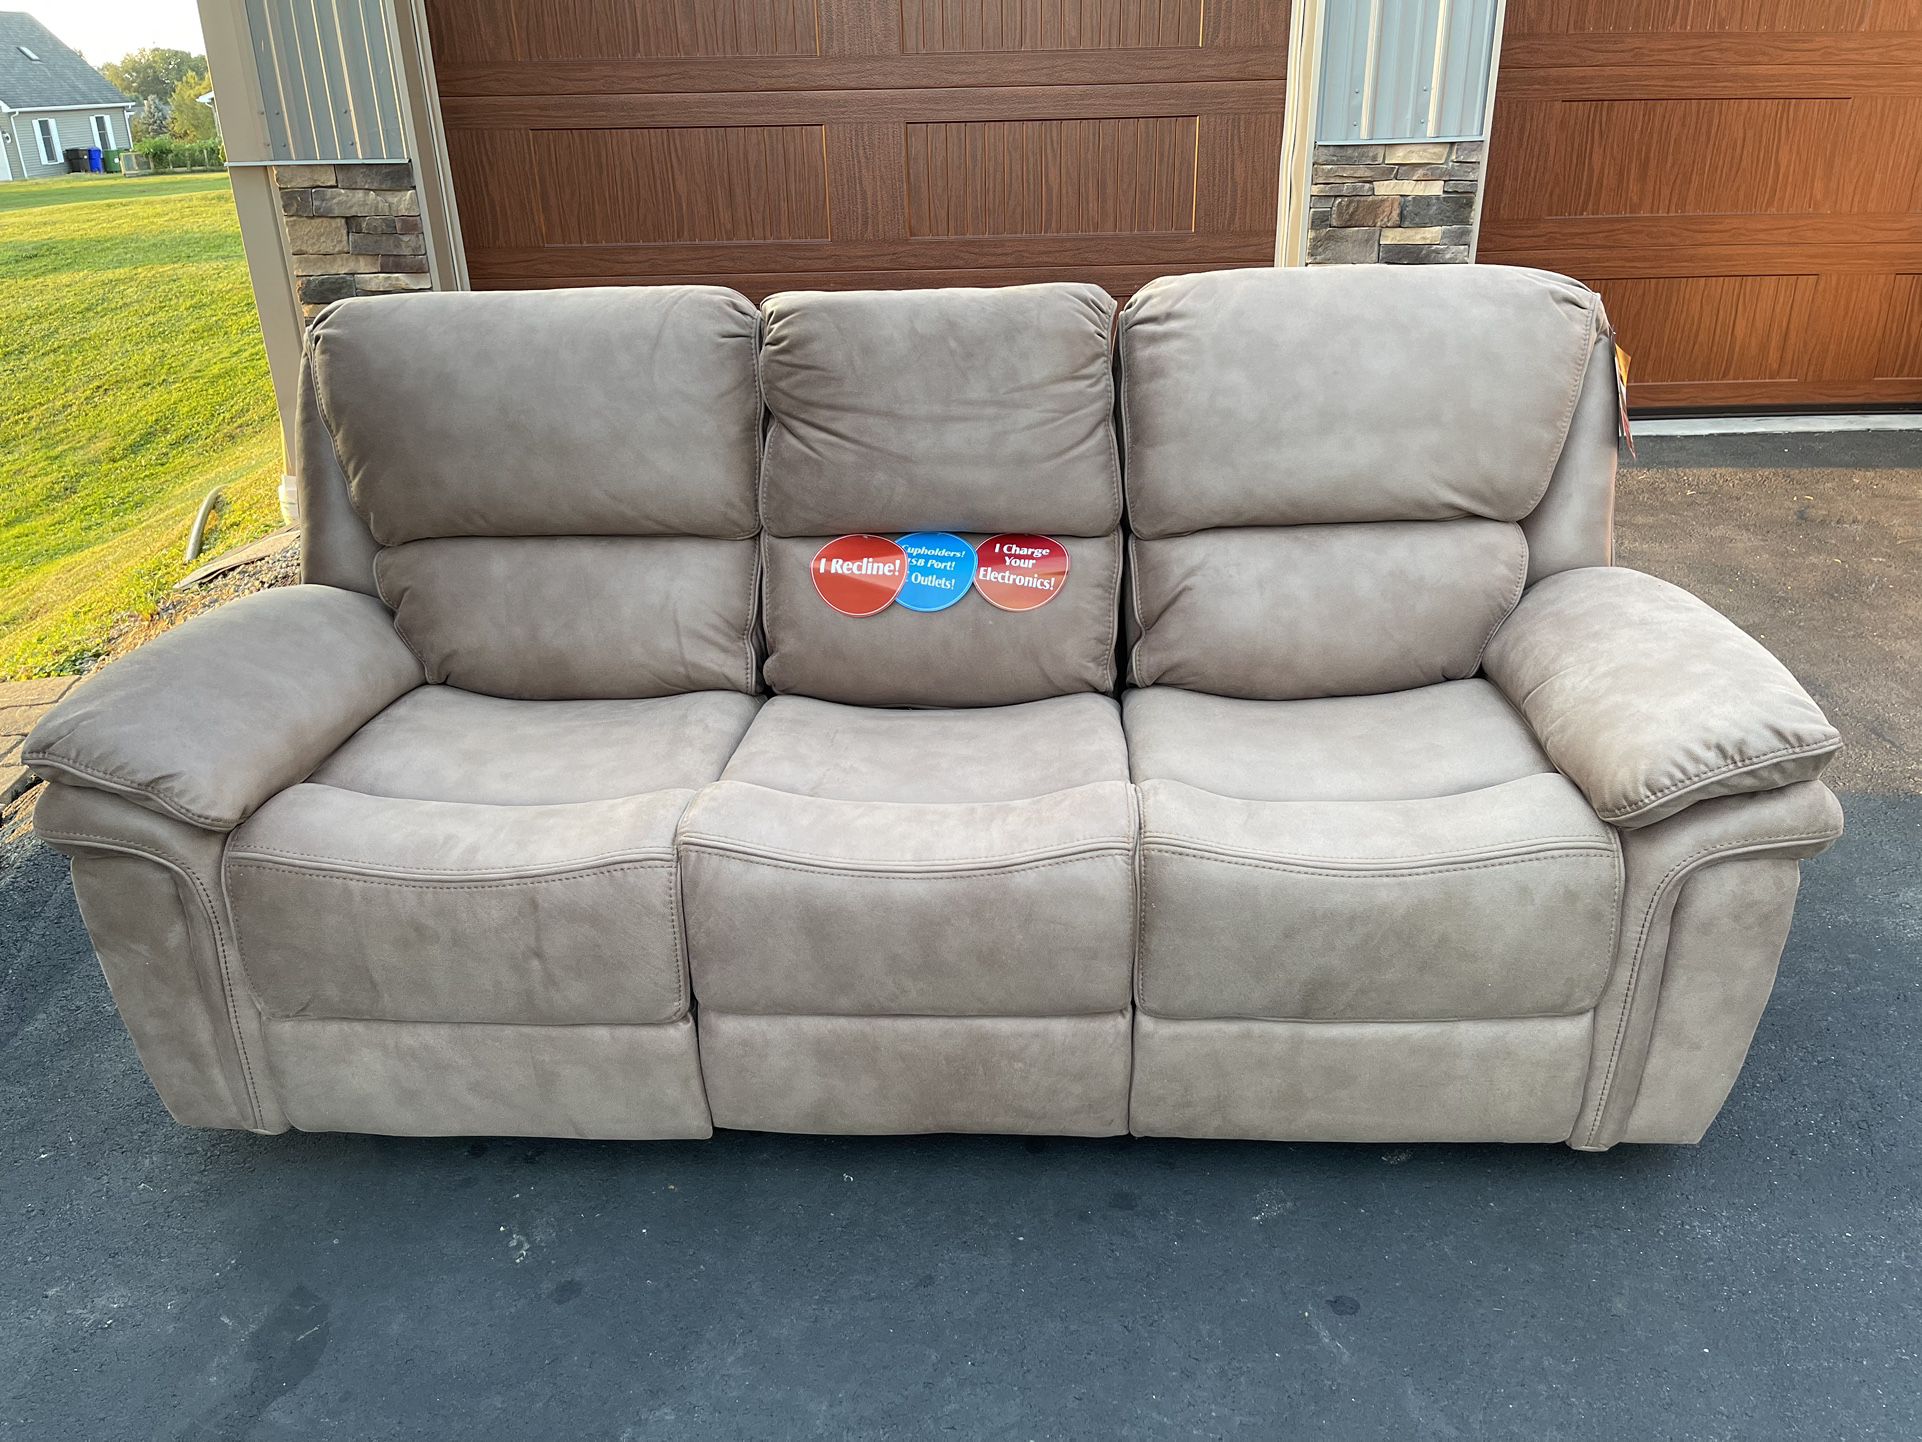 Reclining Sofa   Langston Collection Reclining Sofa -  New Never Used With Tags 